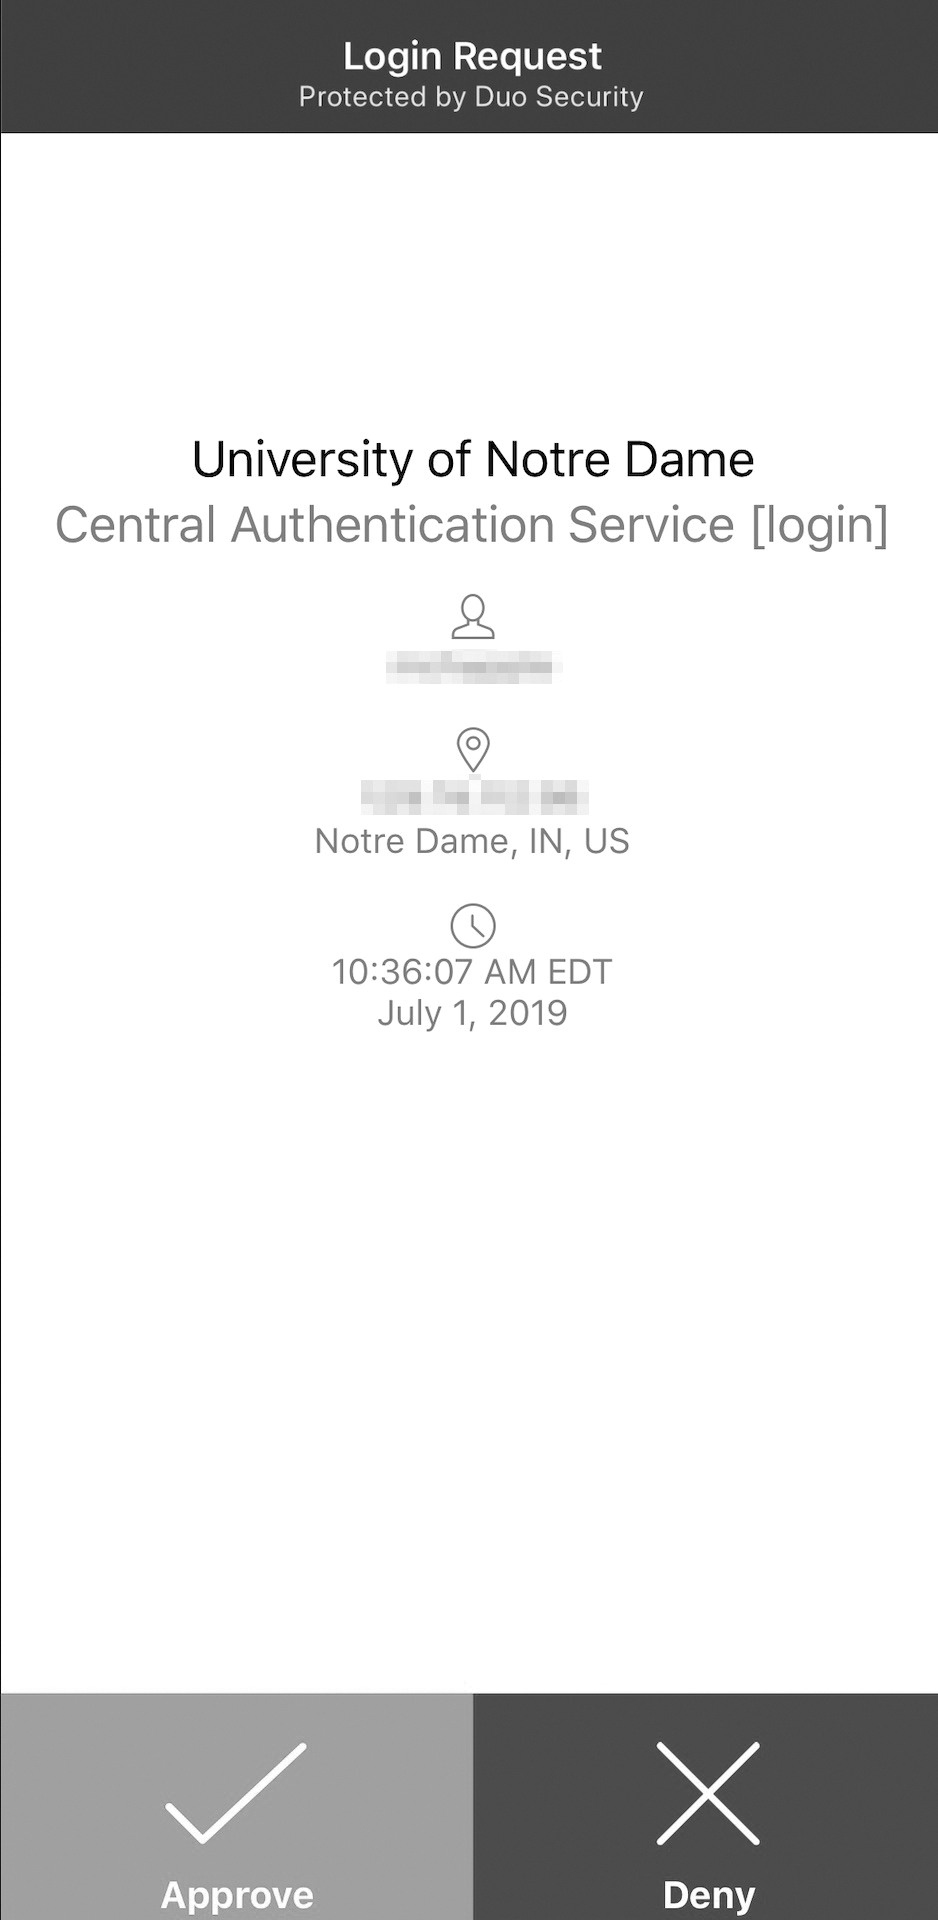 A screenshot of push authentication request from Duo to a user’s smartphone.